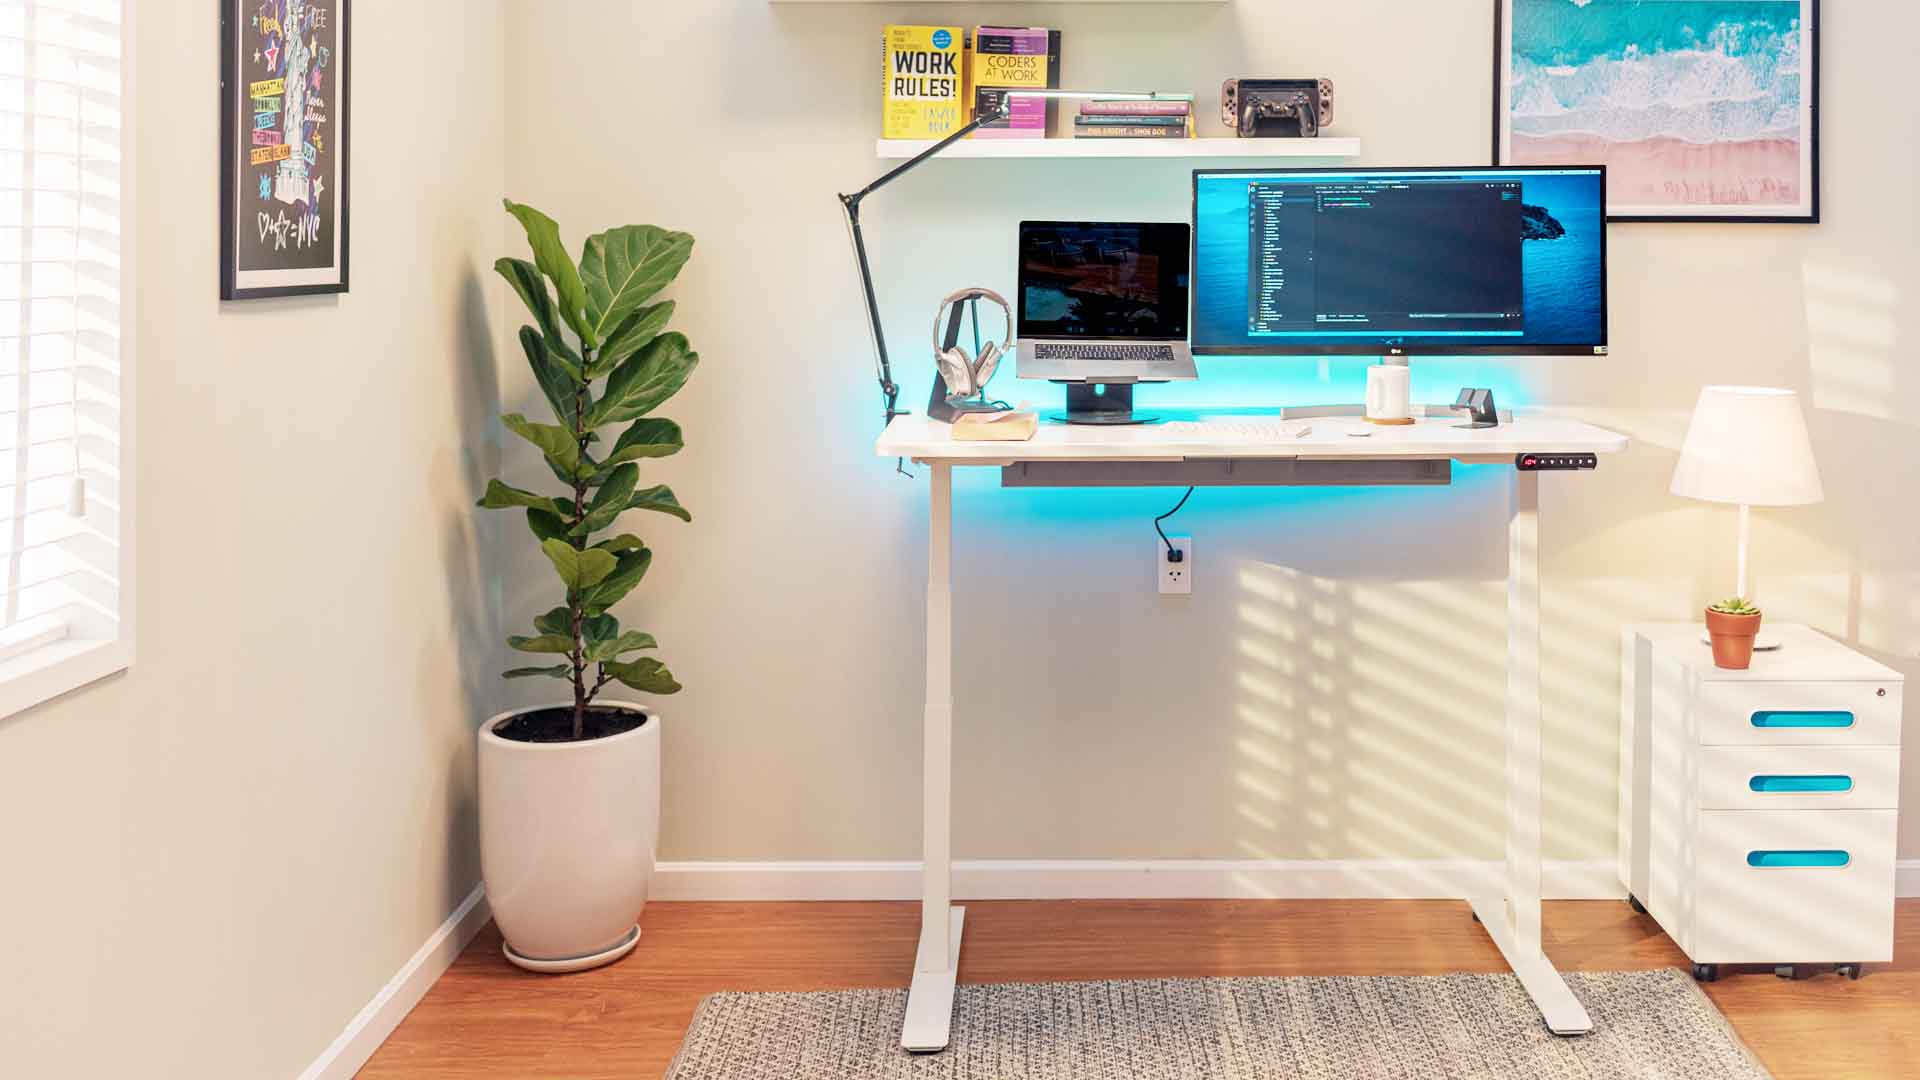 What Are the Benefits of a Standing Desk?